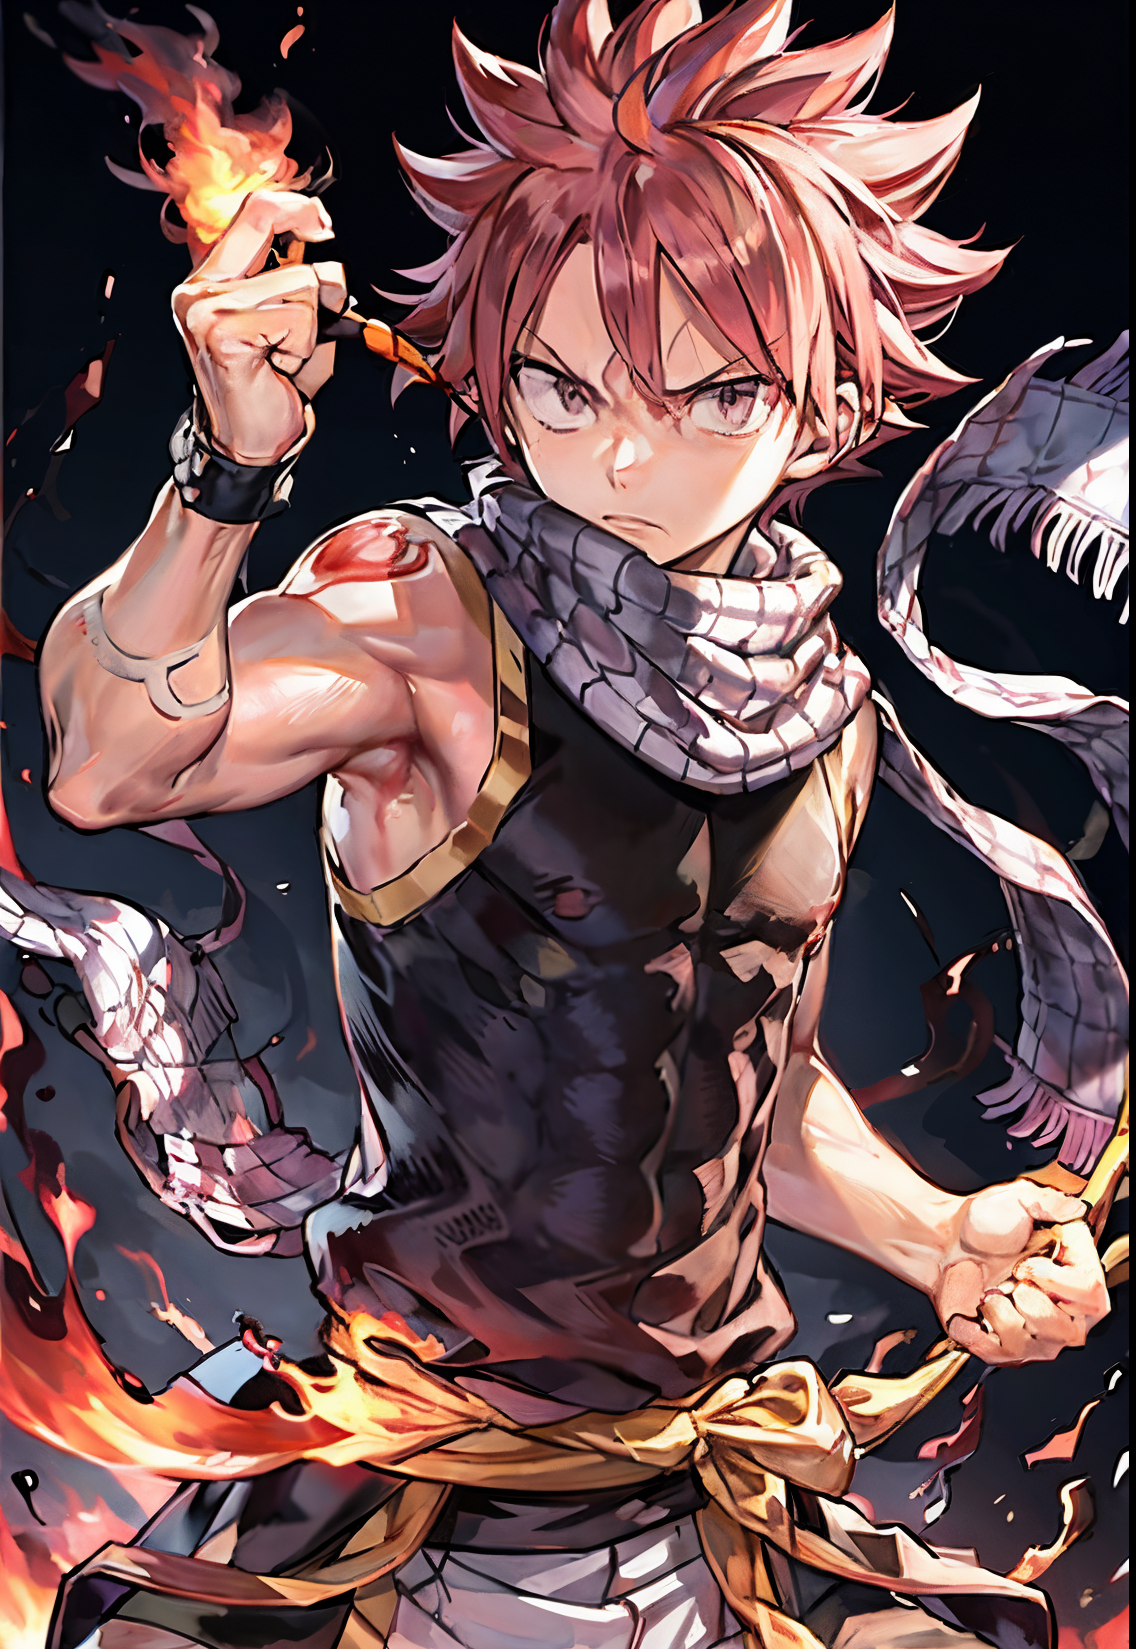 Natsu Dragneel - Fairy Tail, by ZXY8 by zxy8 on DeviantArt